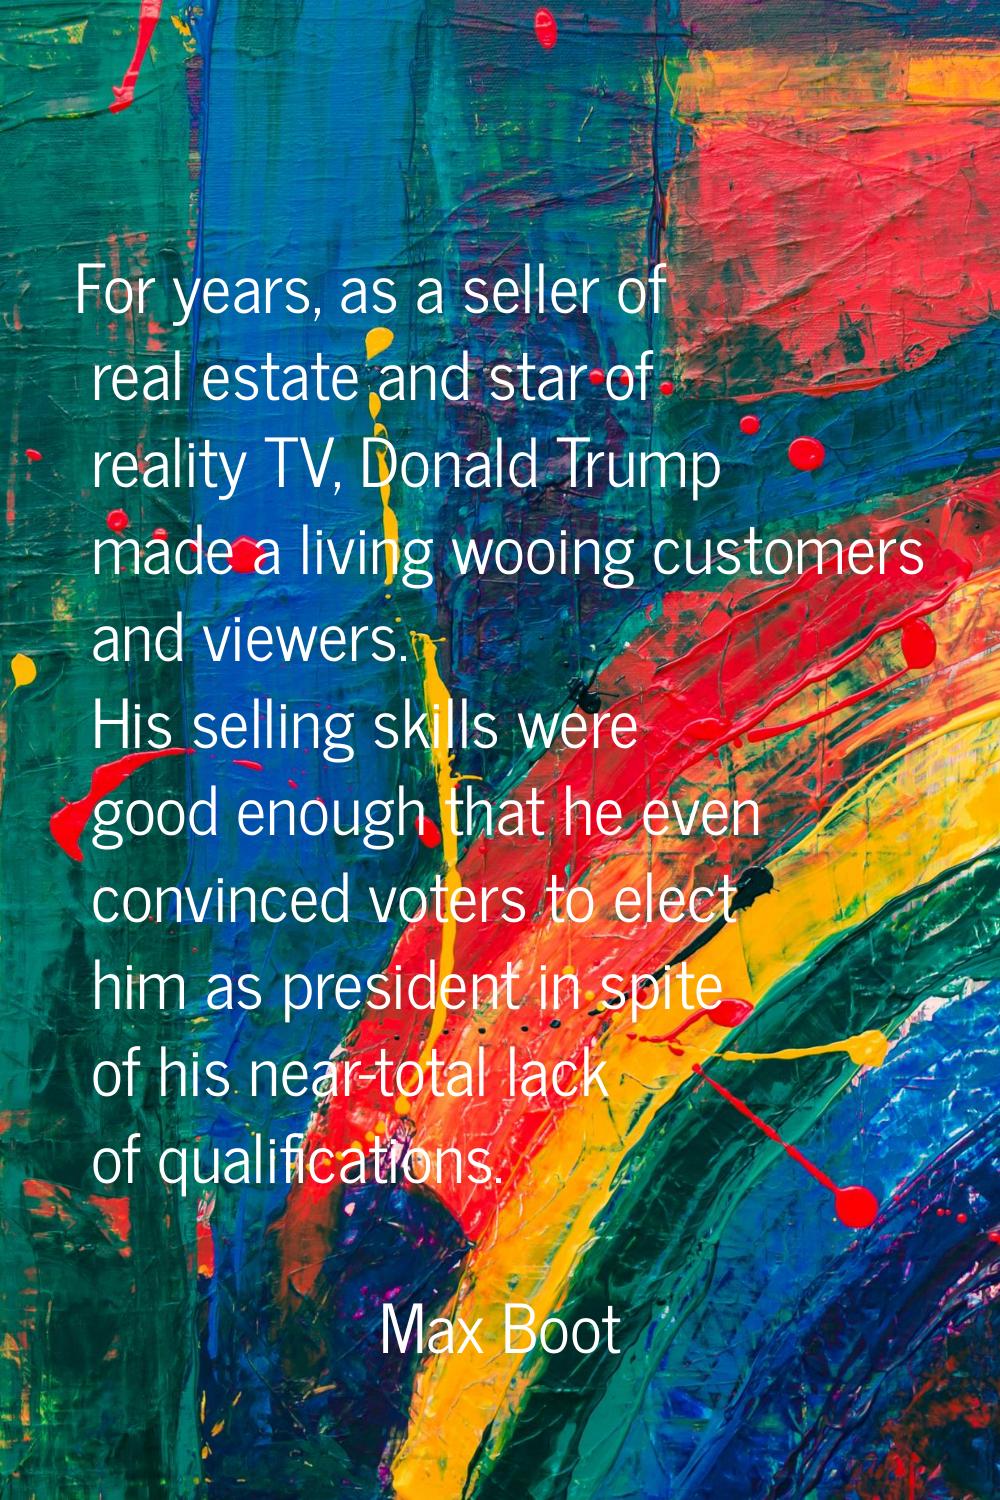 For years, as a seller of real estate and star of reality TV, Donald Trump made a living wooing cus